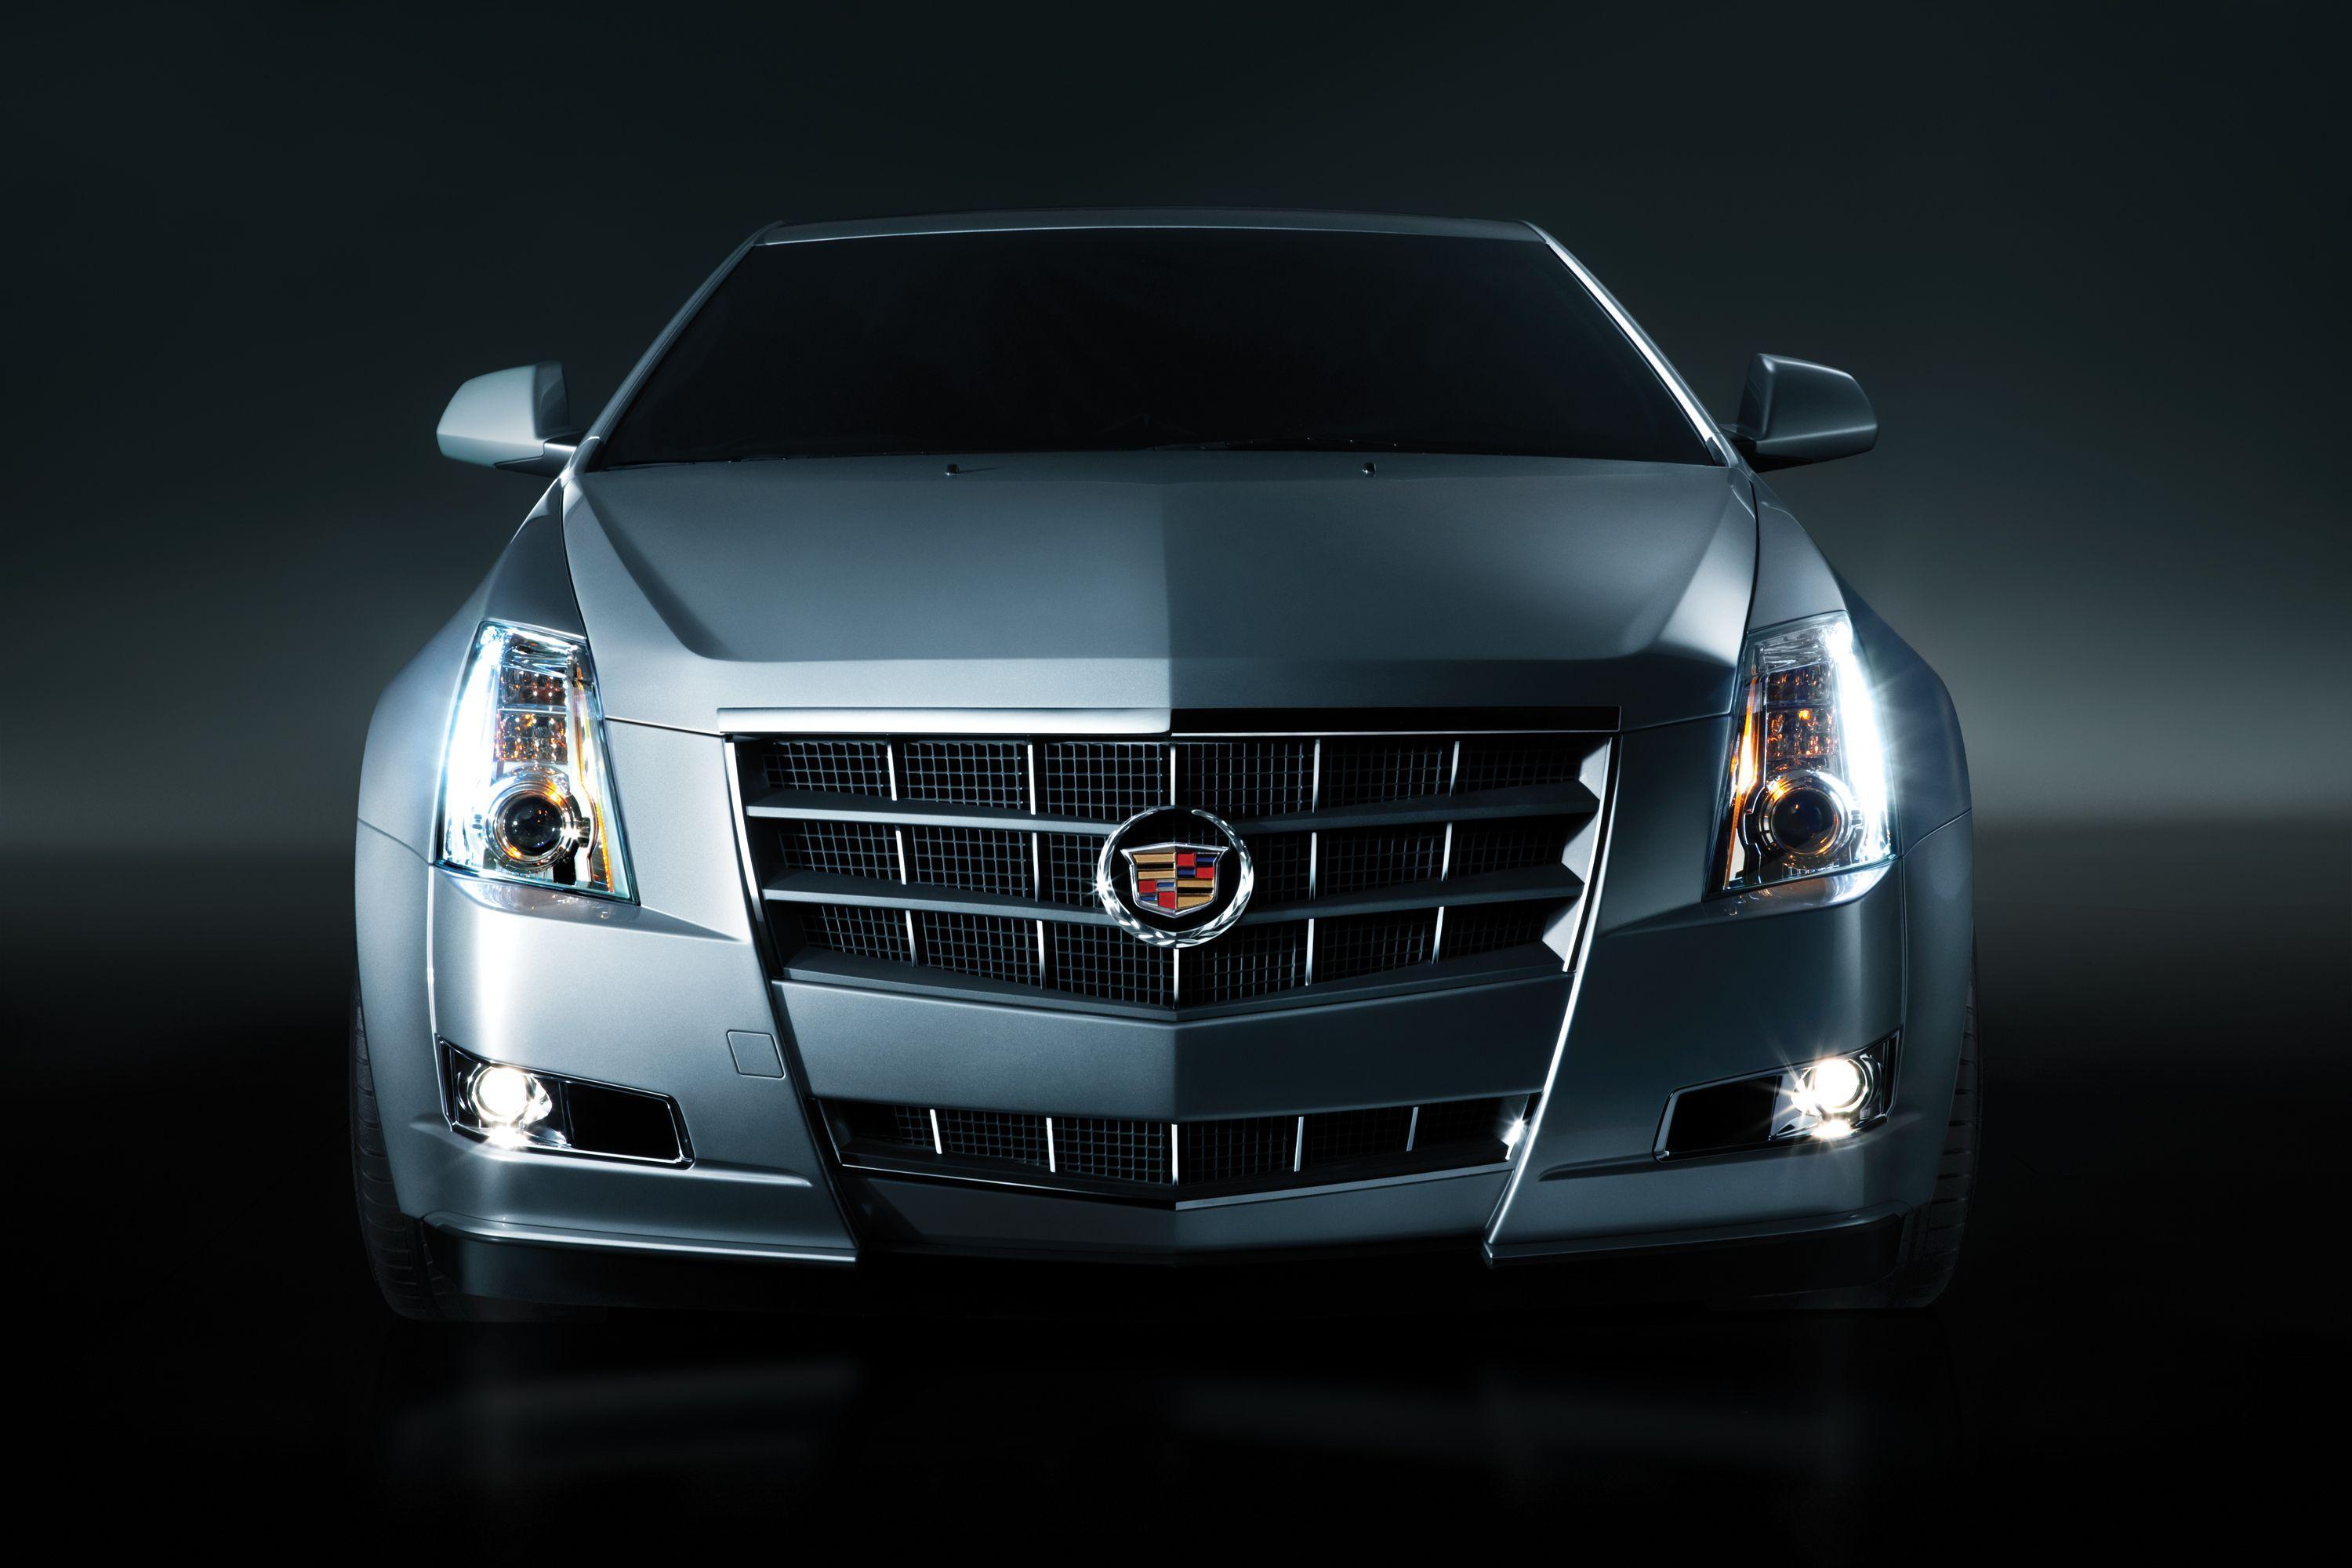 Picture Cadillac Cars